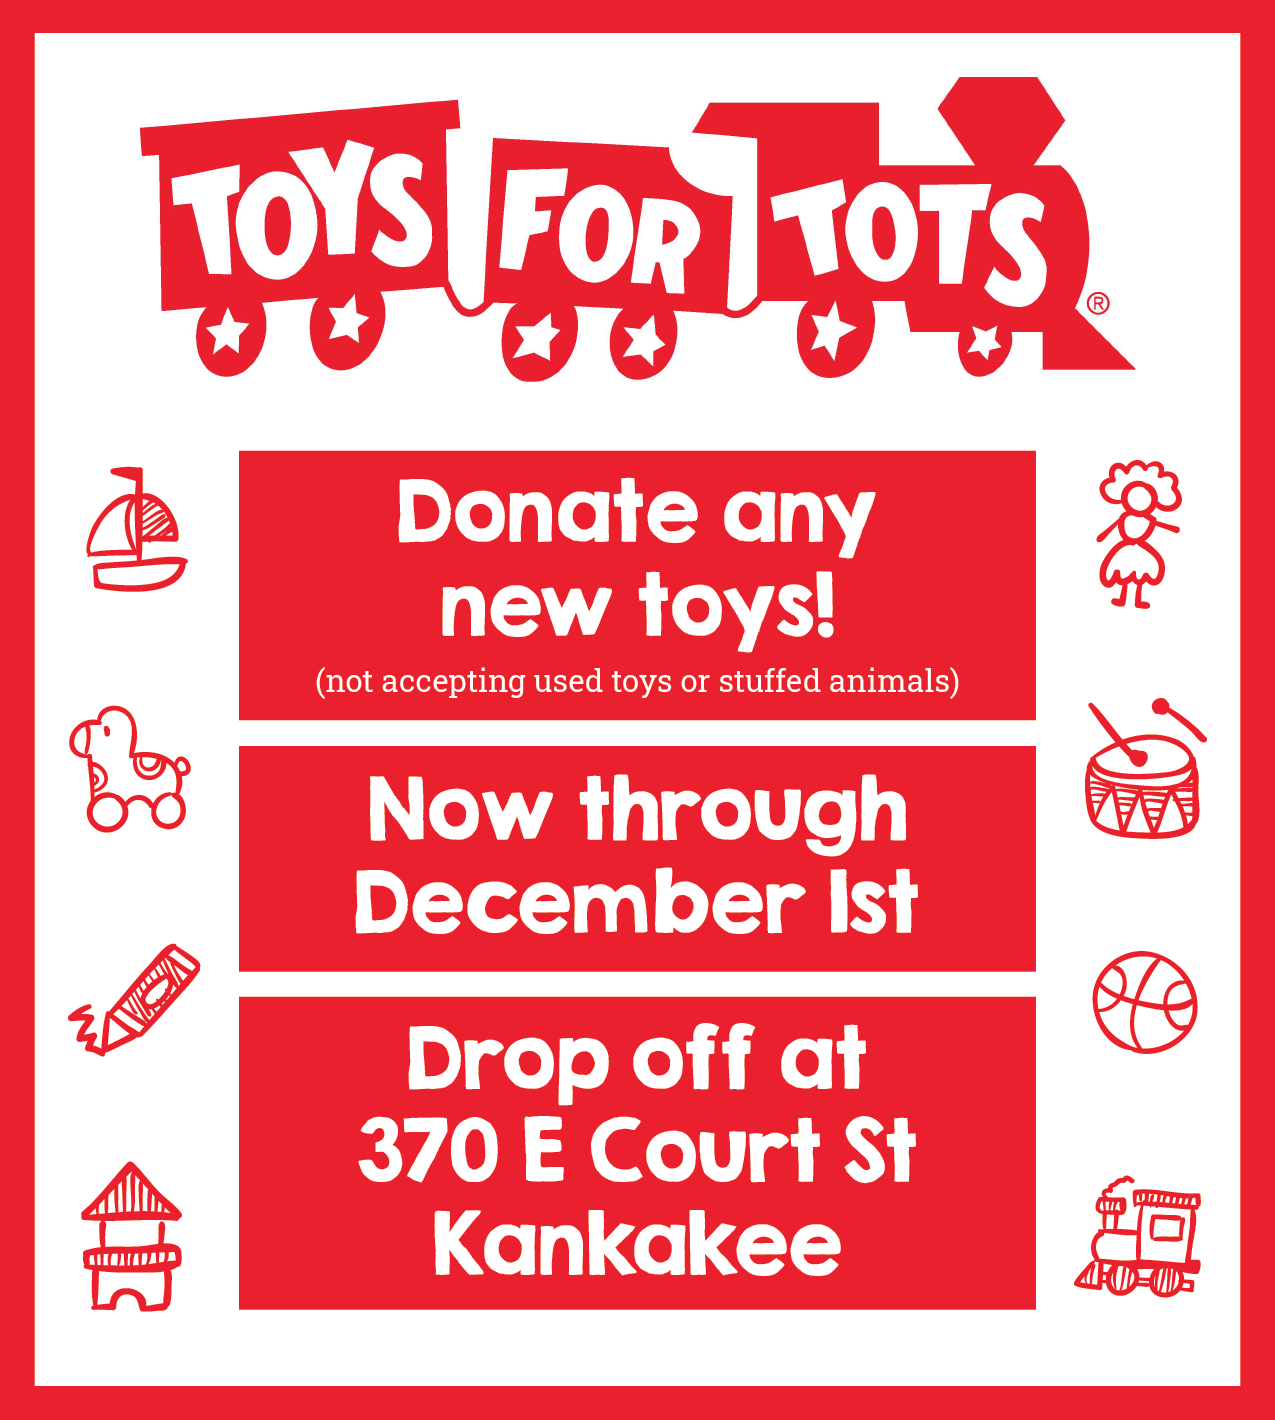 REP. HAAS’ DISTRICT OFFICE TO BE TOYS FOR TOTS DROP OFF LOCATION